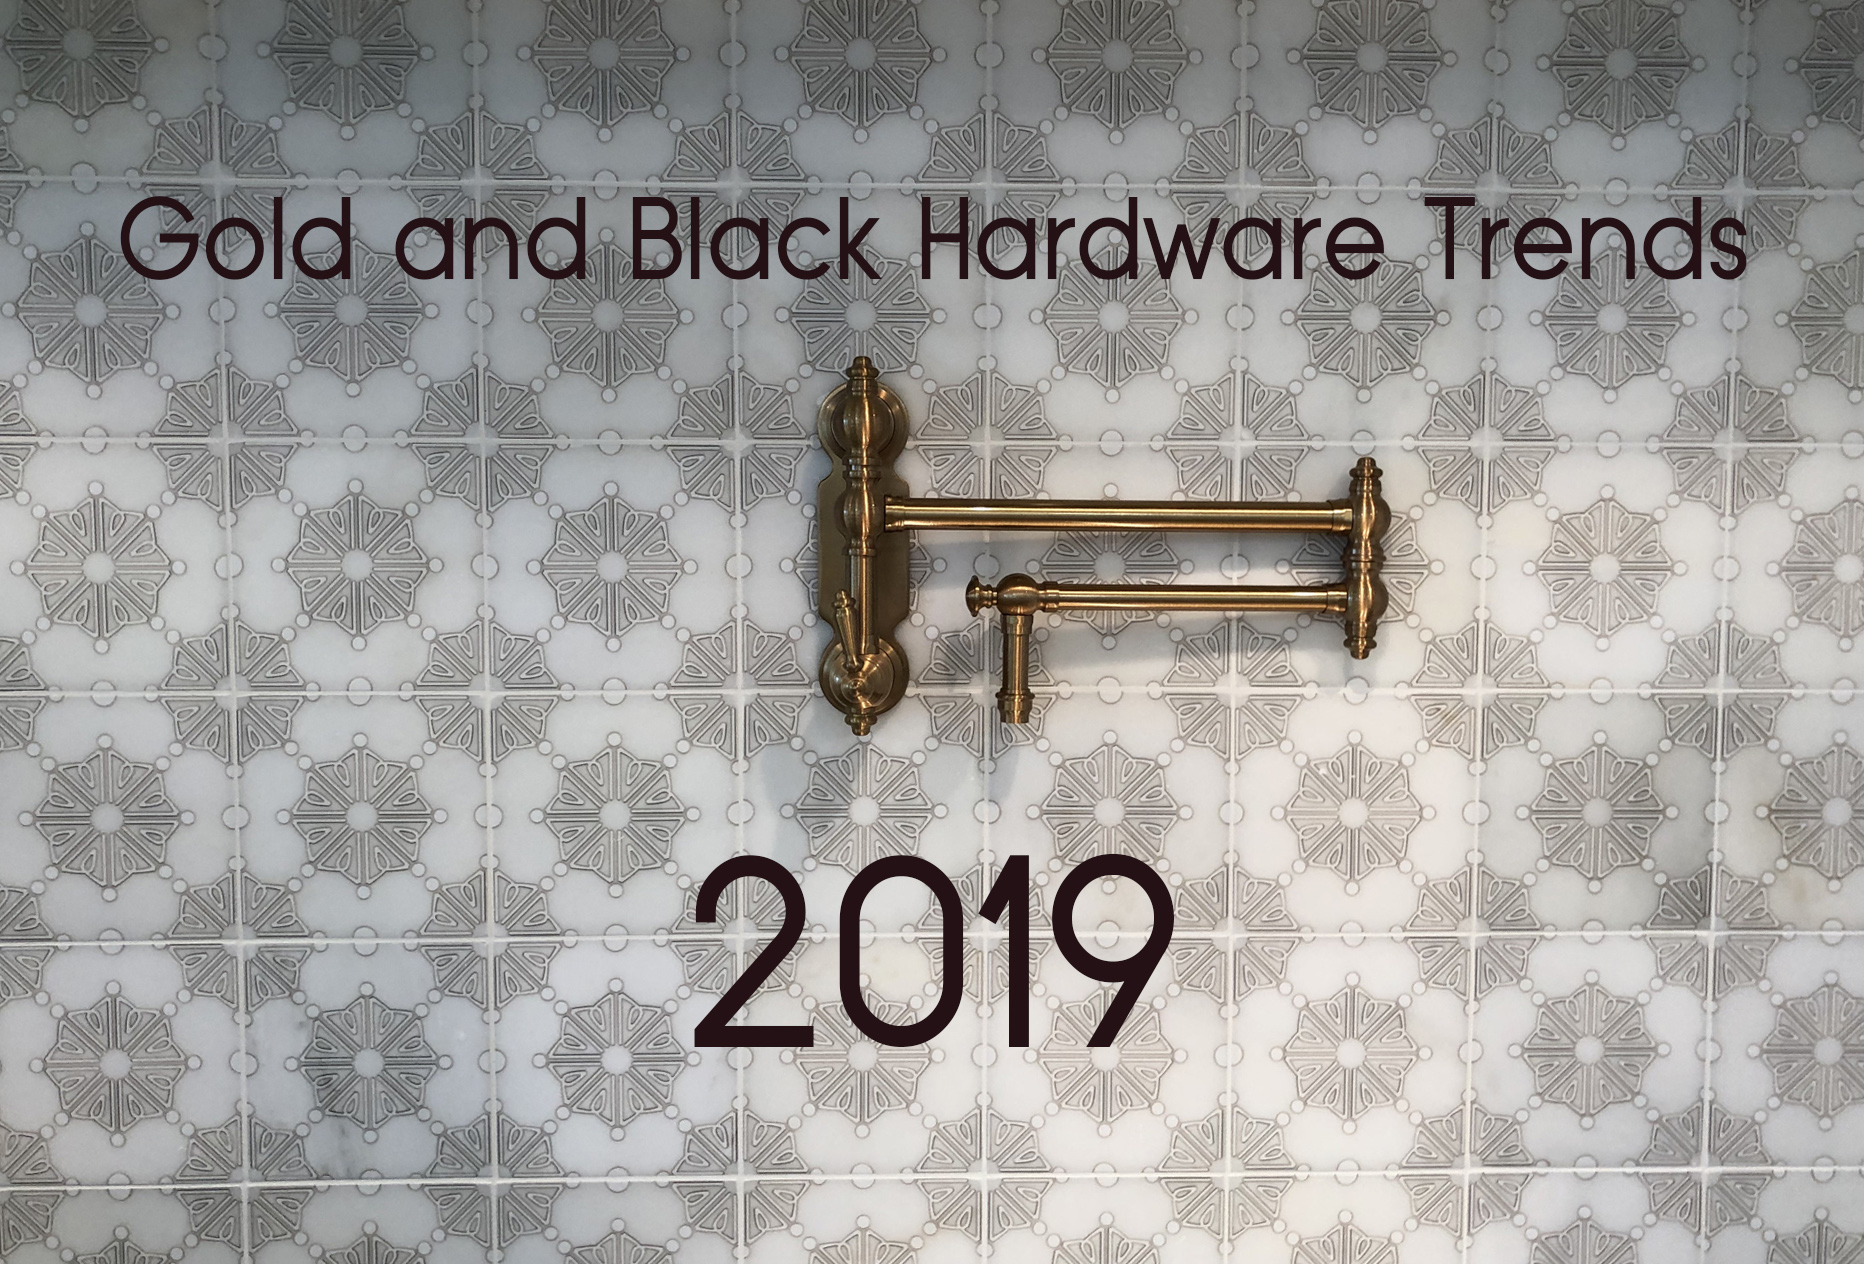 Gold and Black Hardware Trends 2019